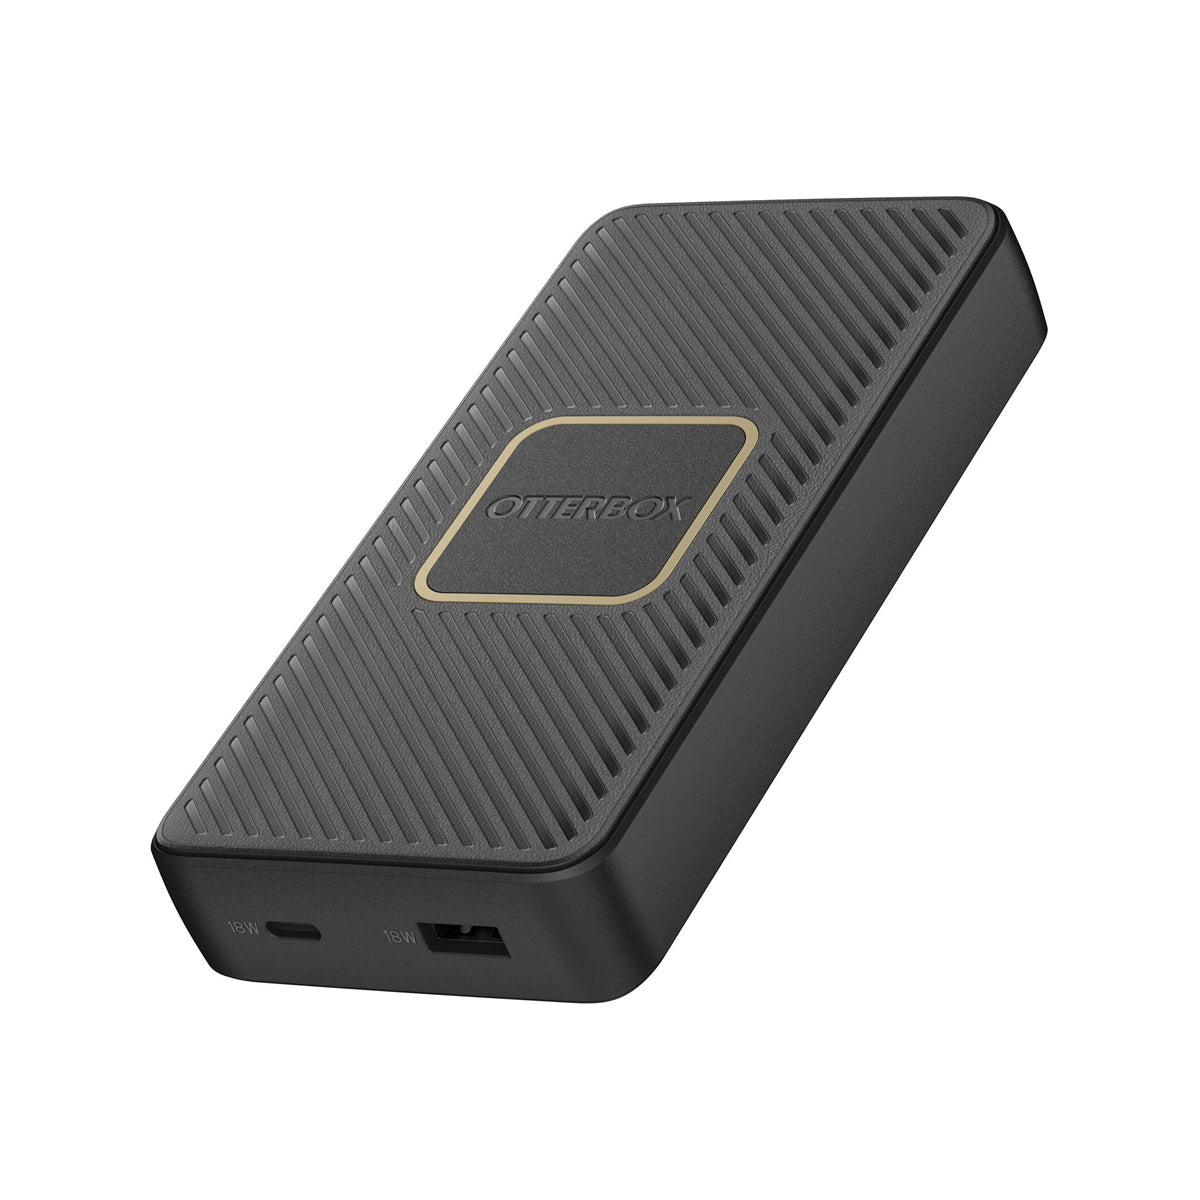 OtterBox Wireless 15000 mAh Power Bank for Mobiles/Tablets - Twilight Black.